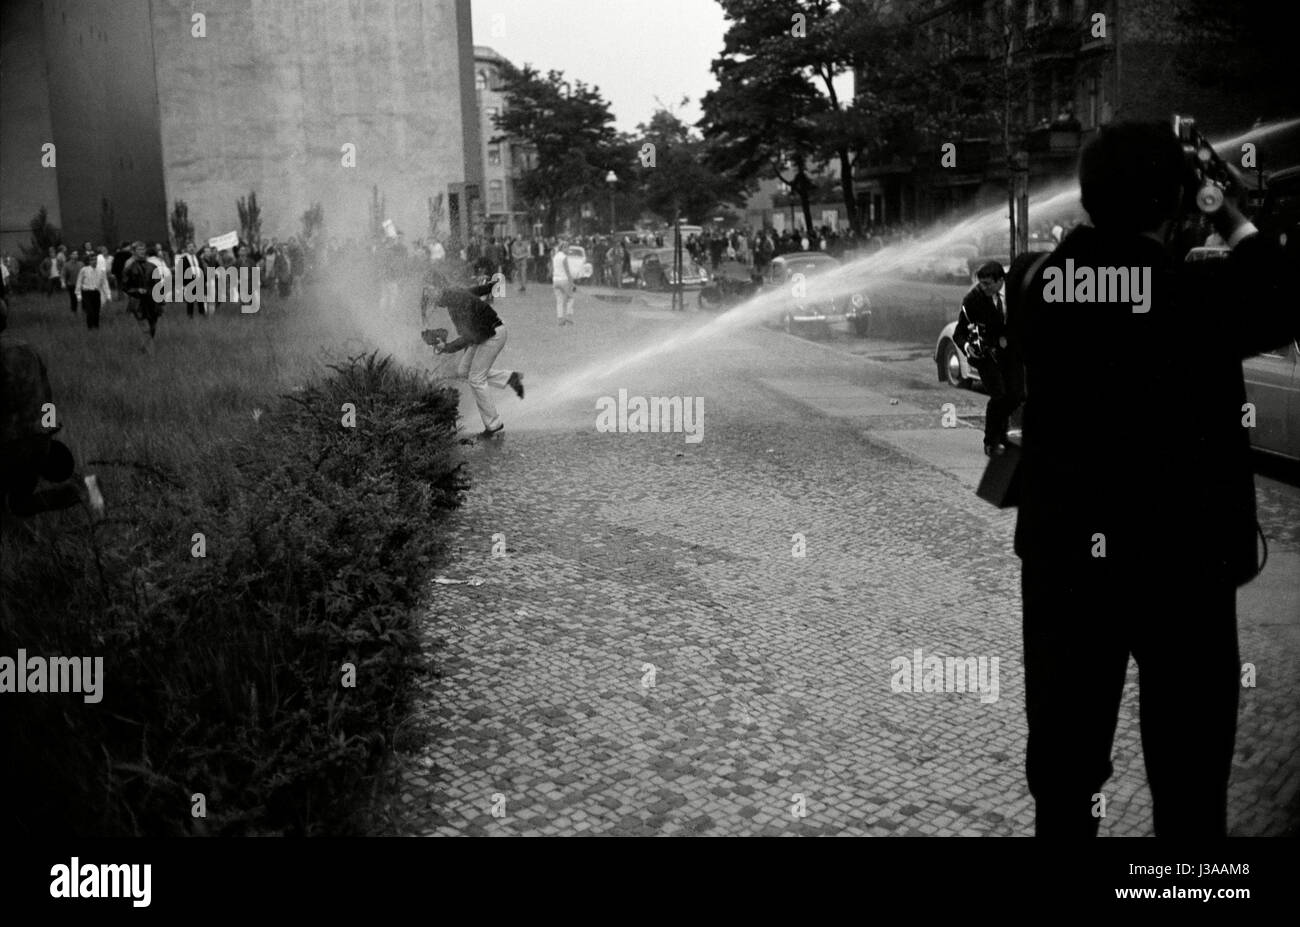 Police forces are using water canons in Berlin, 1967 Stock Photo